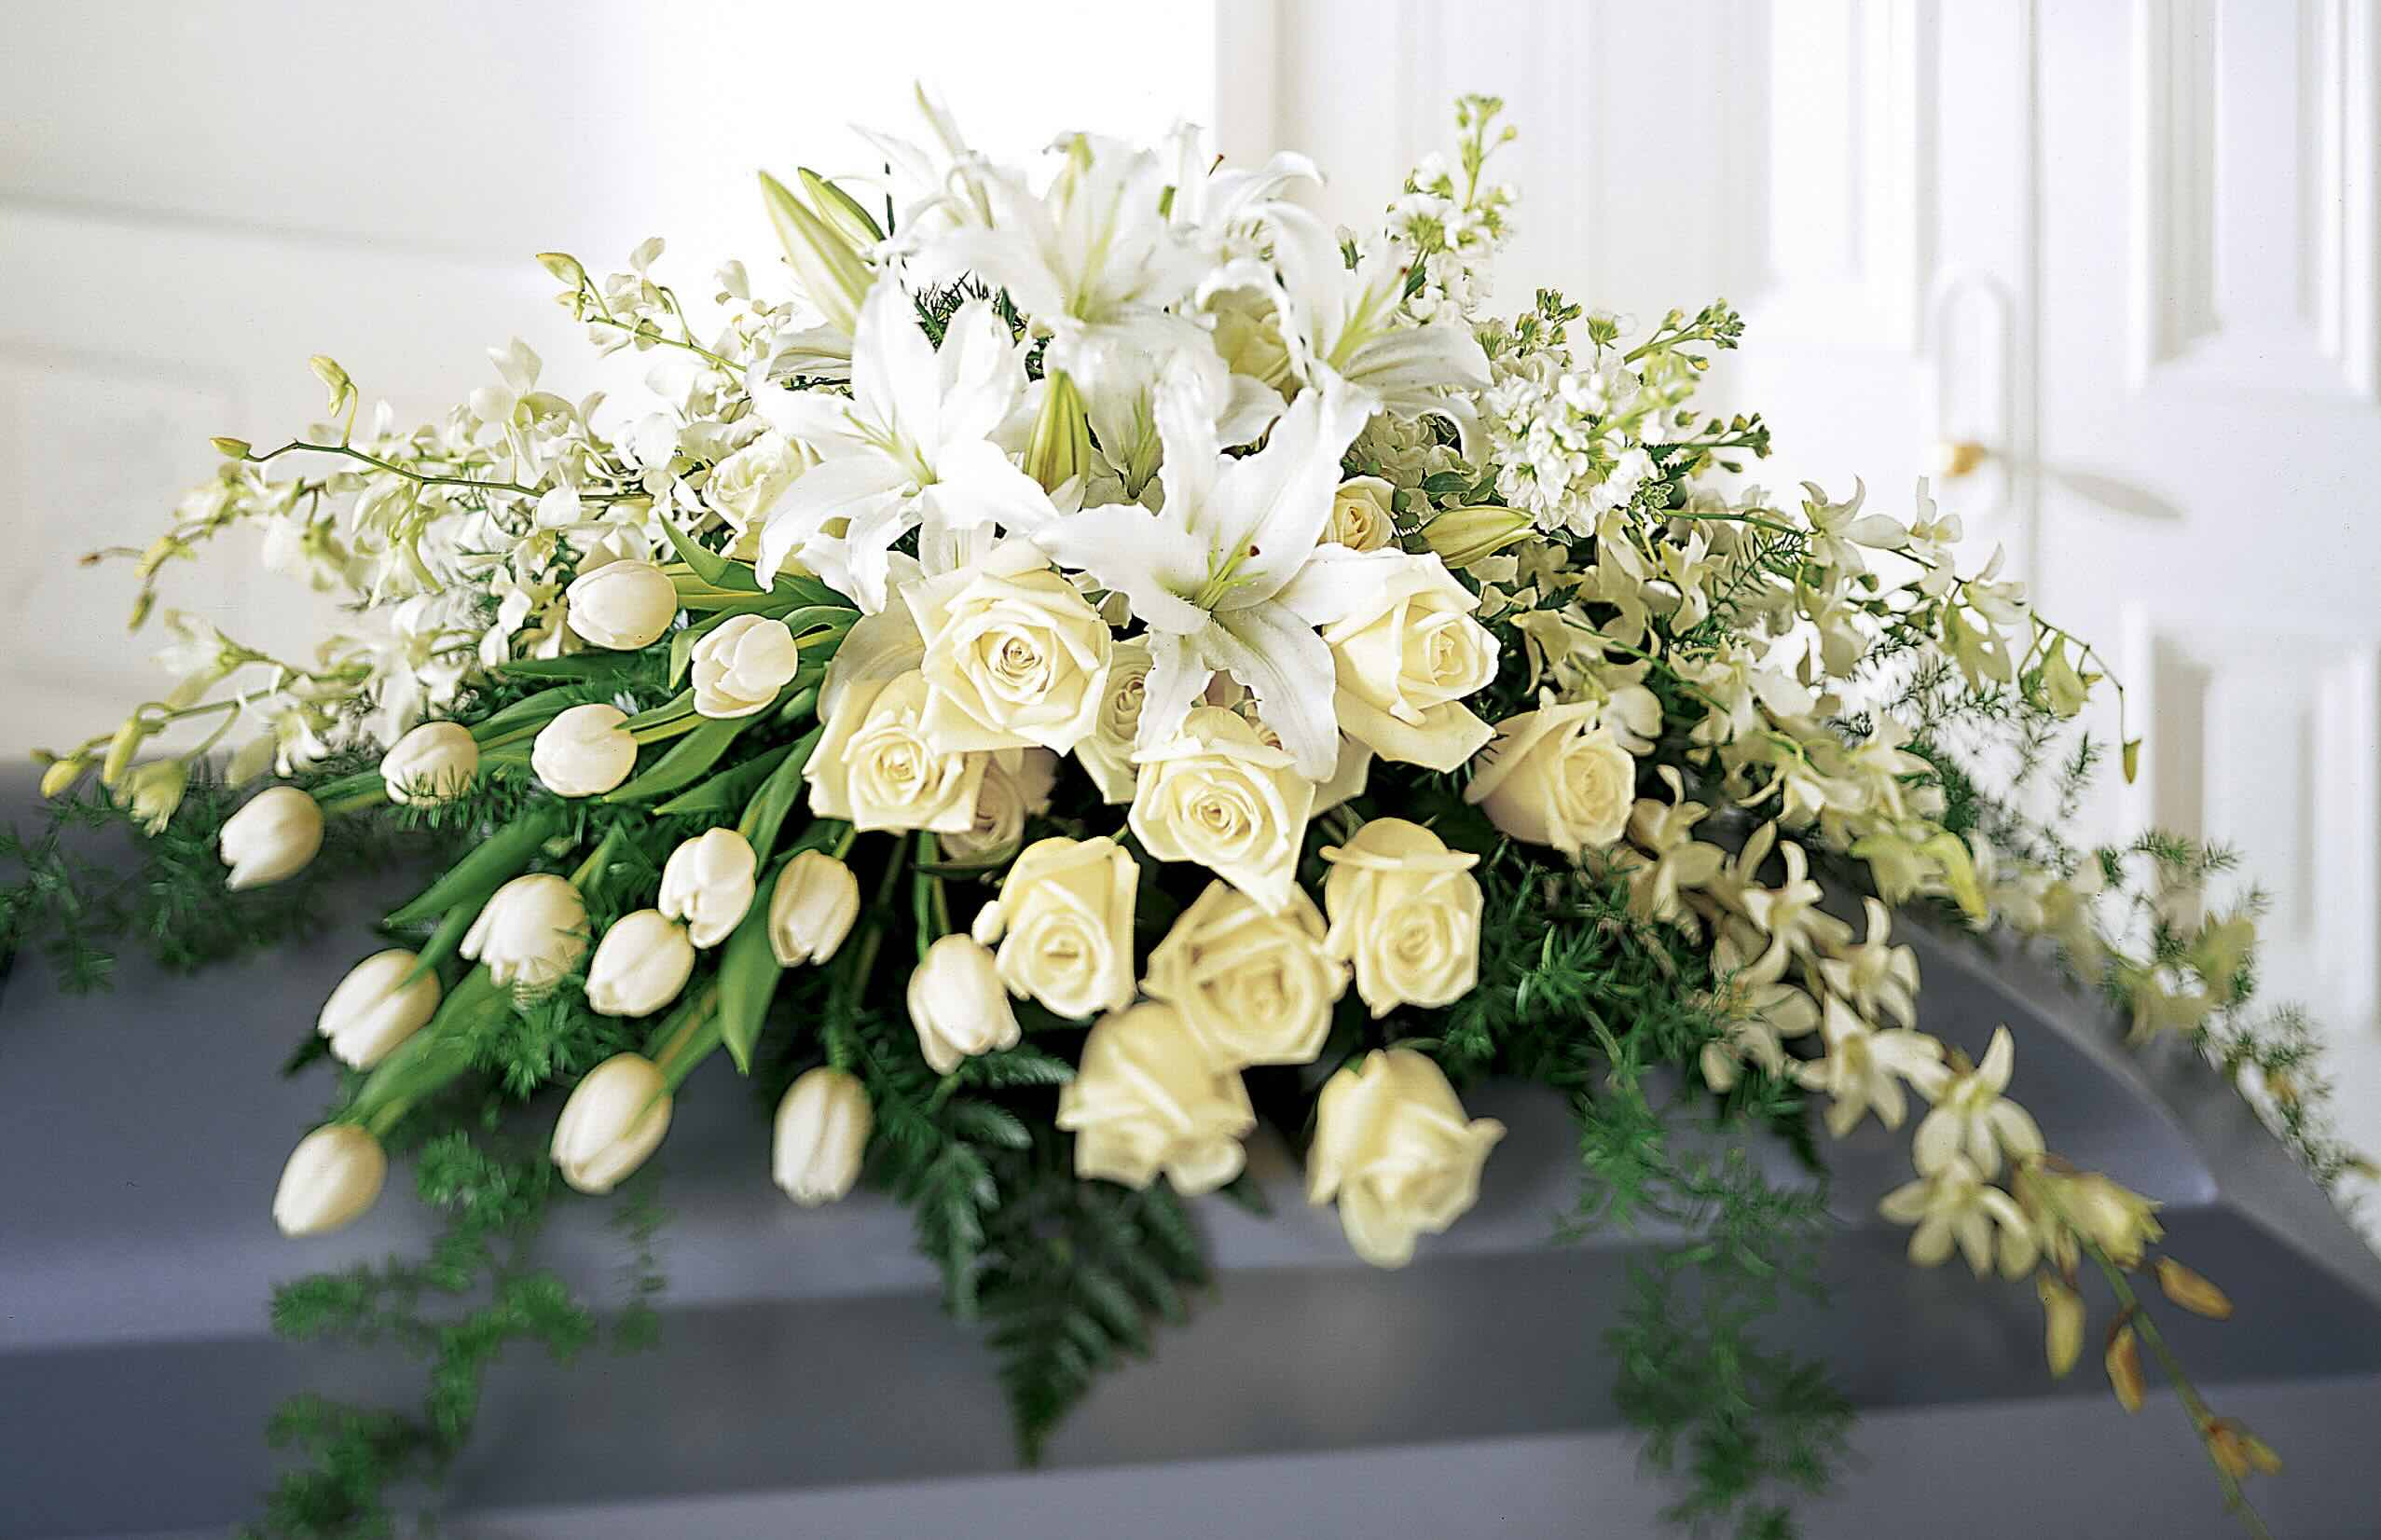 What Are Good Funeral Floral Arrangements